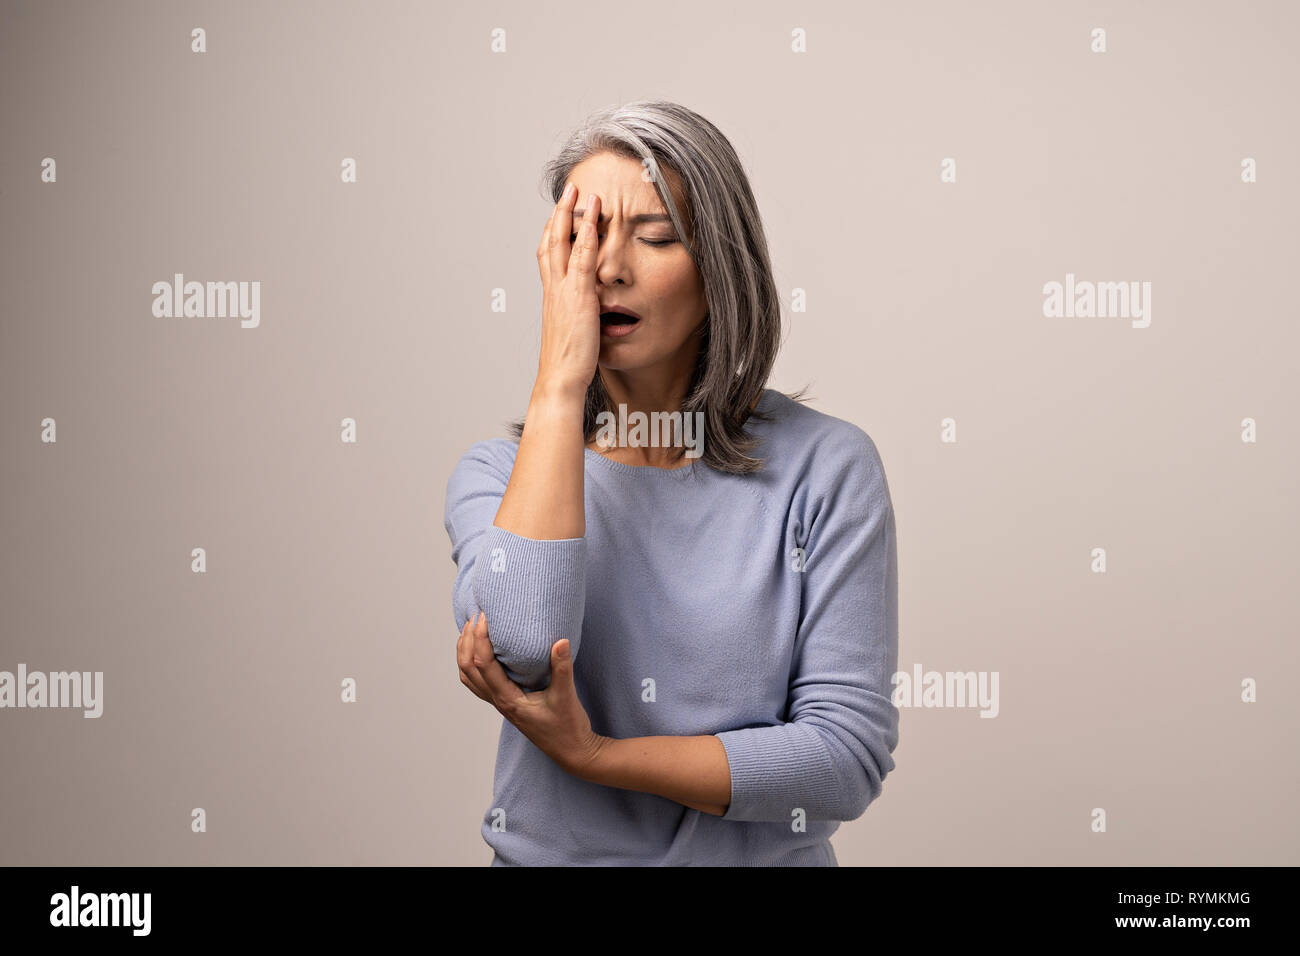 Asian woman covering her face with hand on white background Banque D'Images